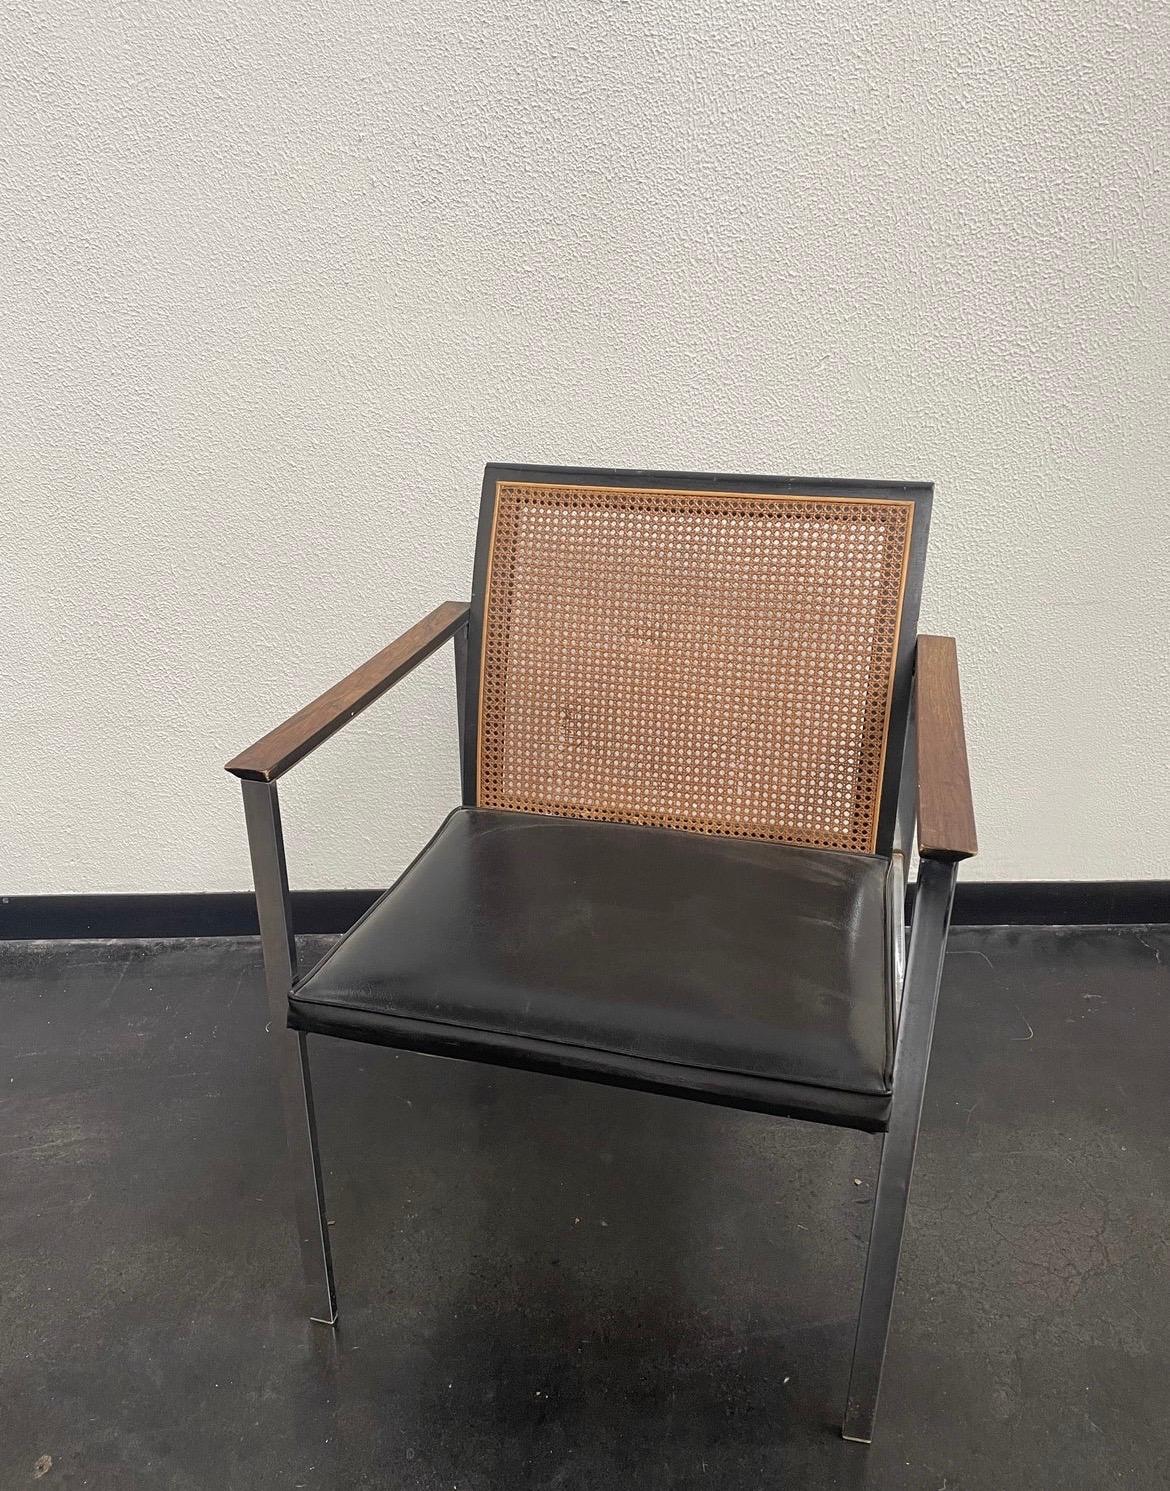 Rare Lane Furniture Mid-Century Modern chair with chrome frame, black vinyl seat, and cane back.